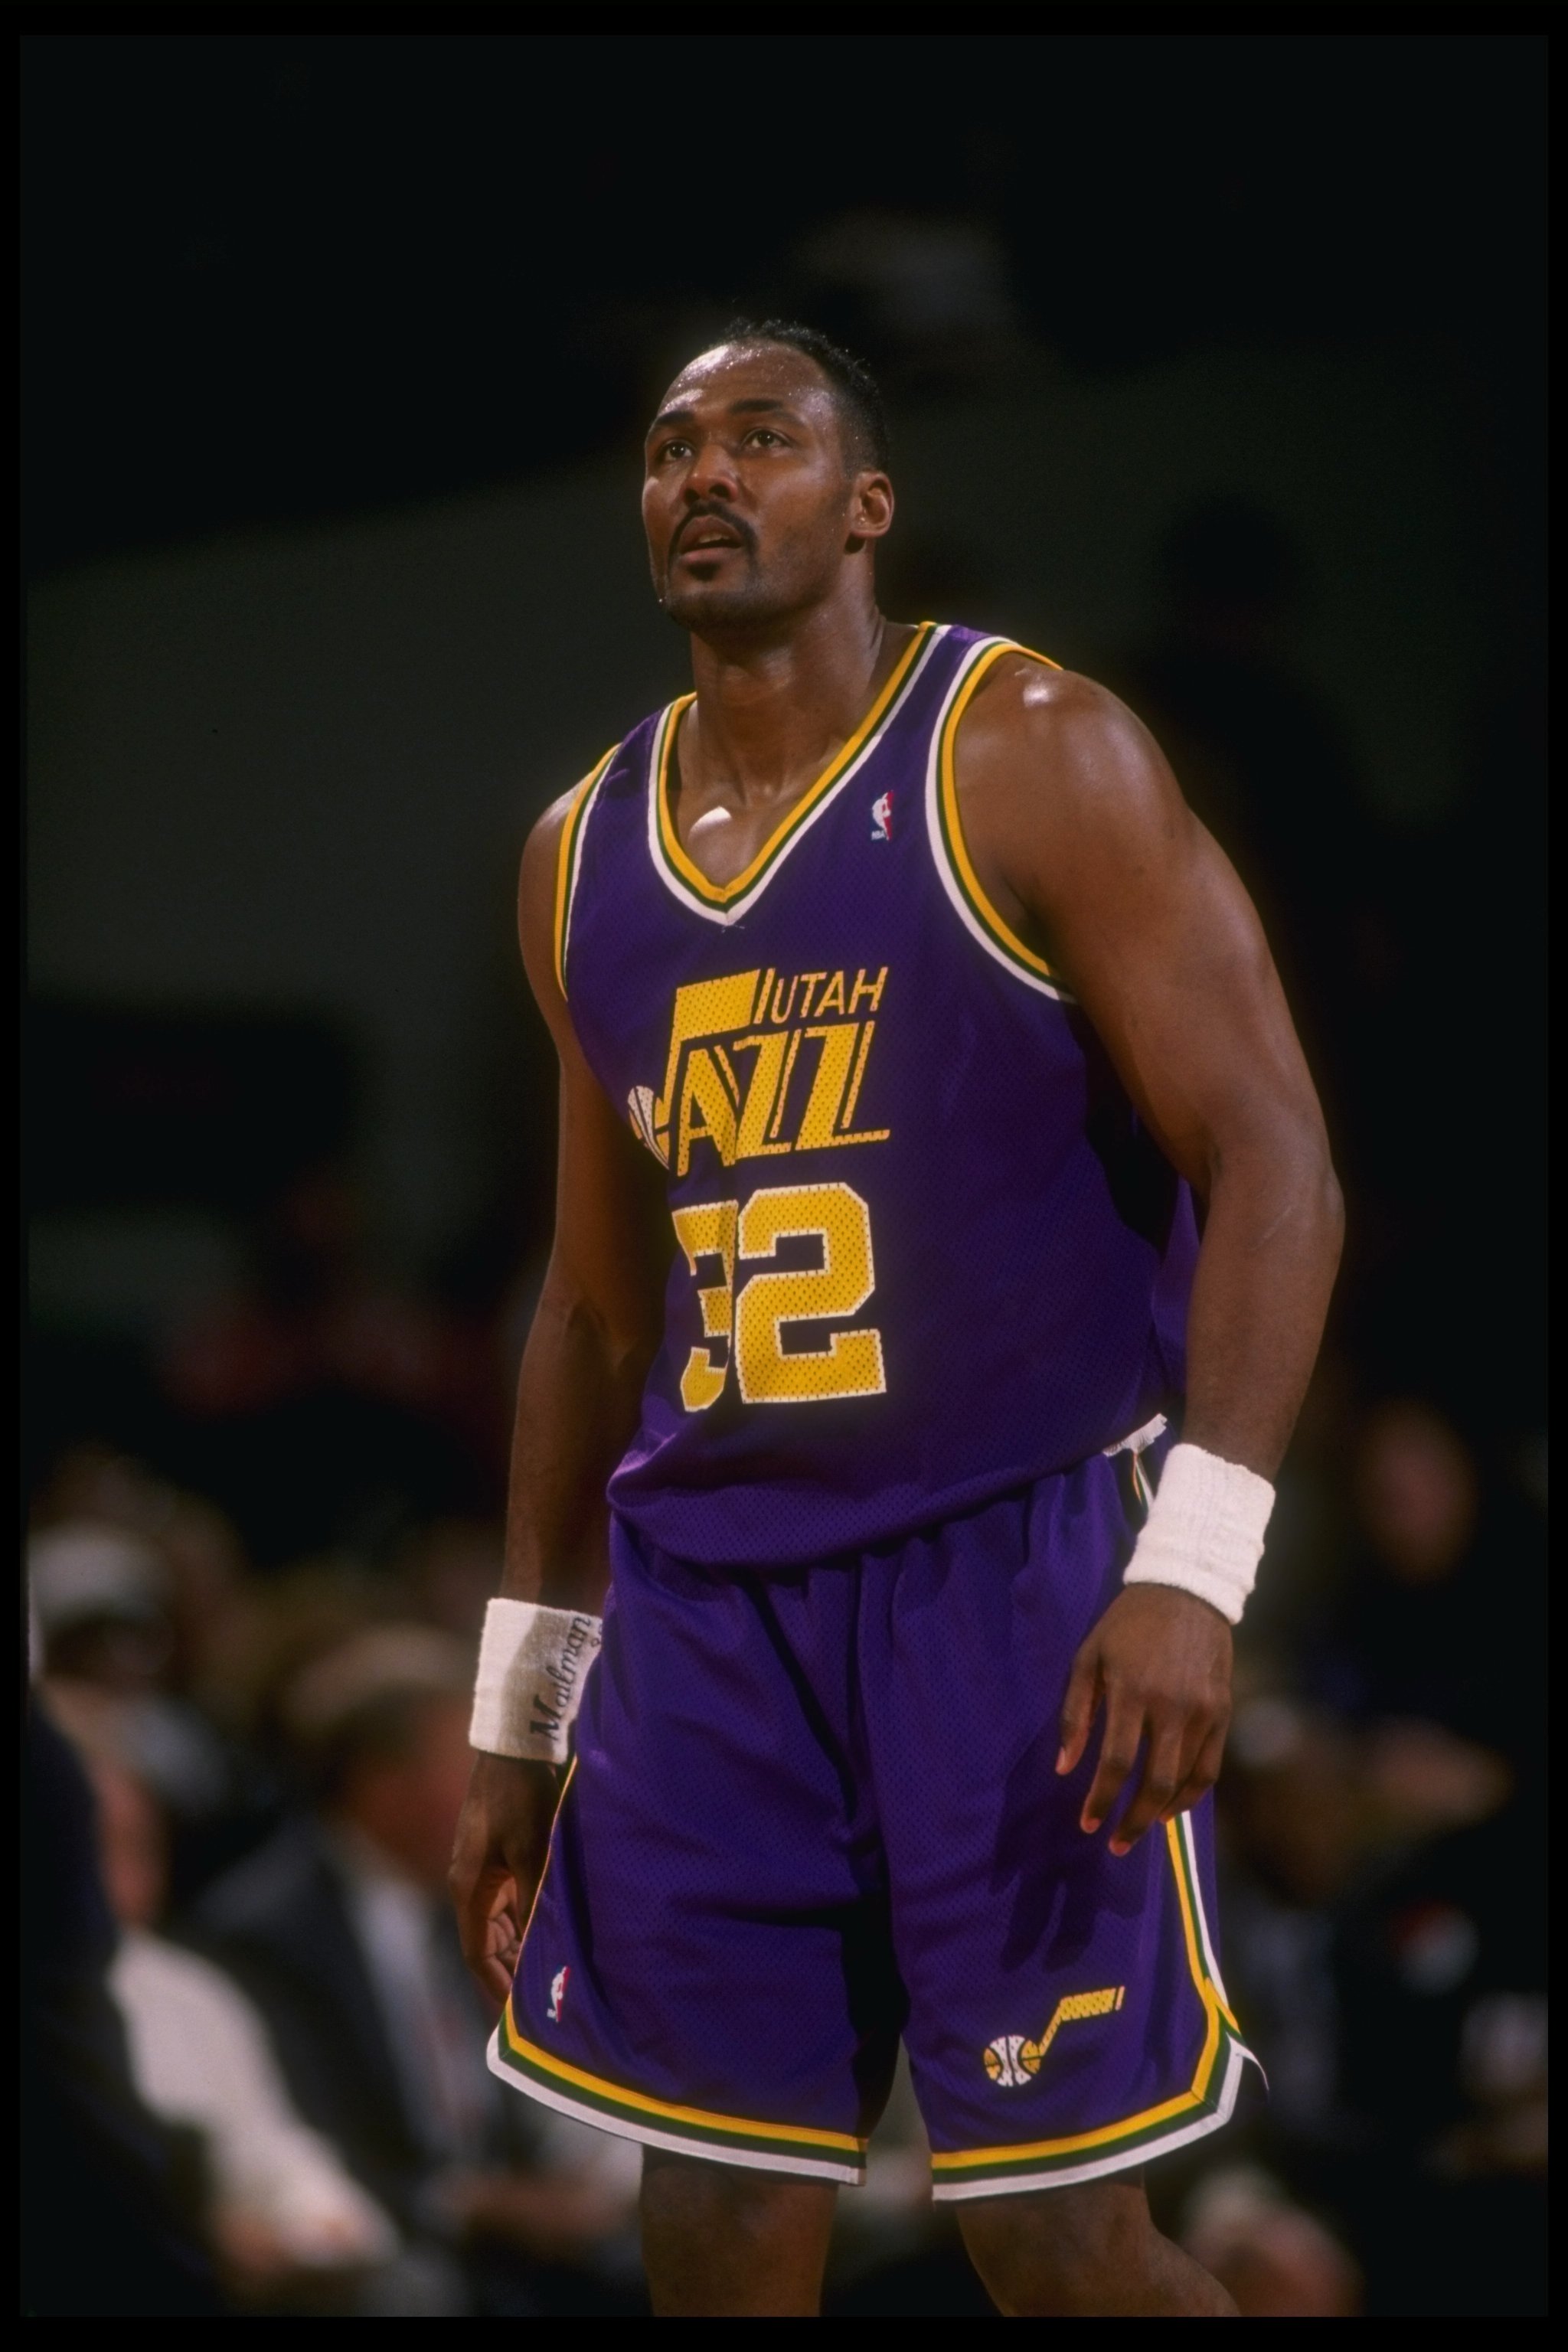 24 Feb 1995: Forward Karl Malone of the Utah Jazz looks on during a game against the Portland Trail Blazers at the Rose Garden in Portland, Oregon. The Blazers won the game, 114-101.